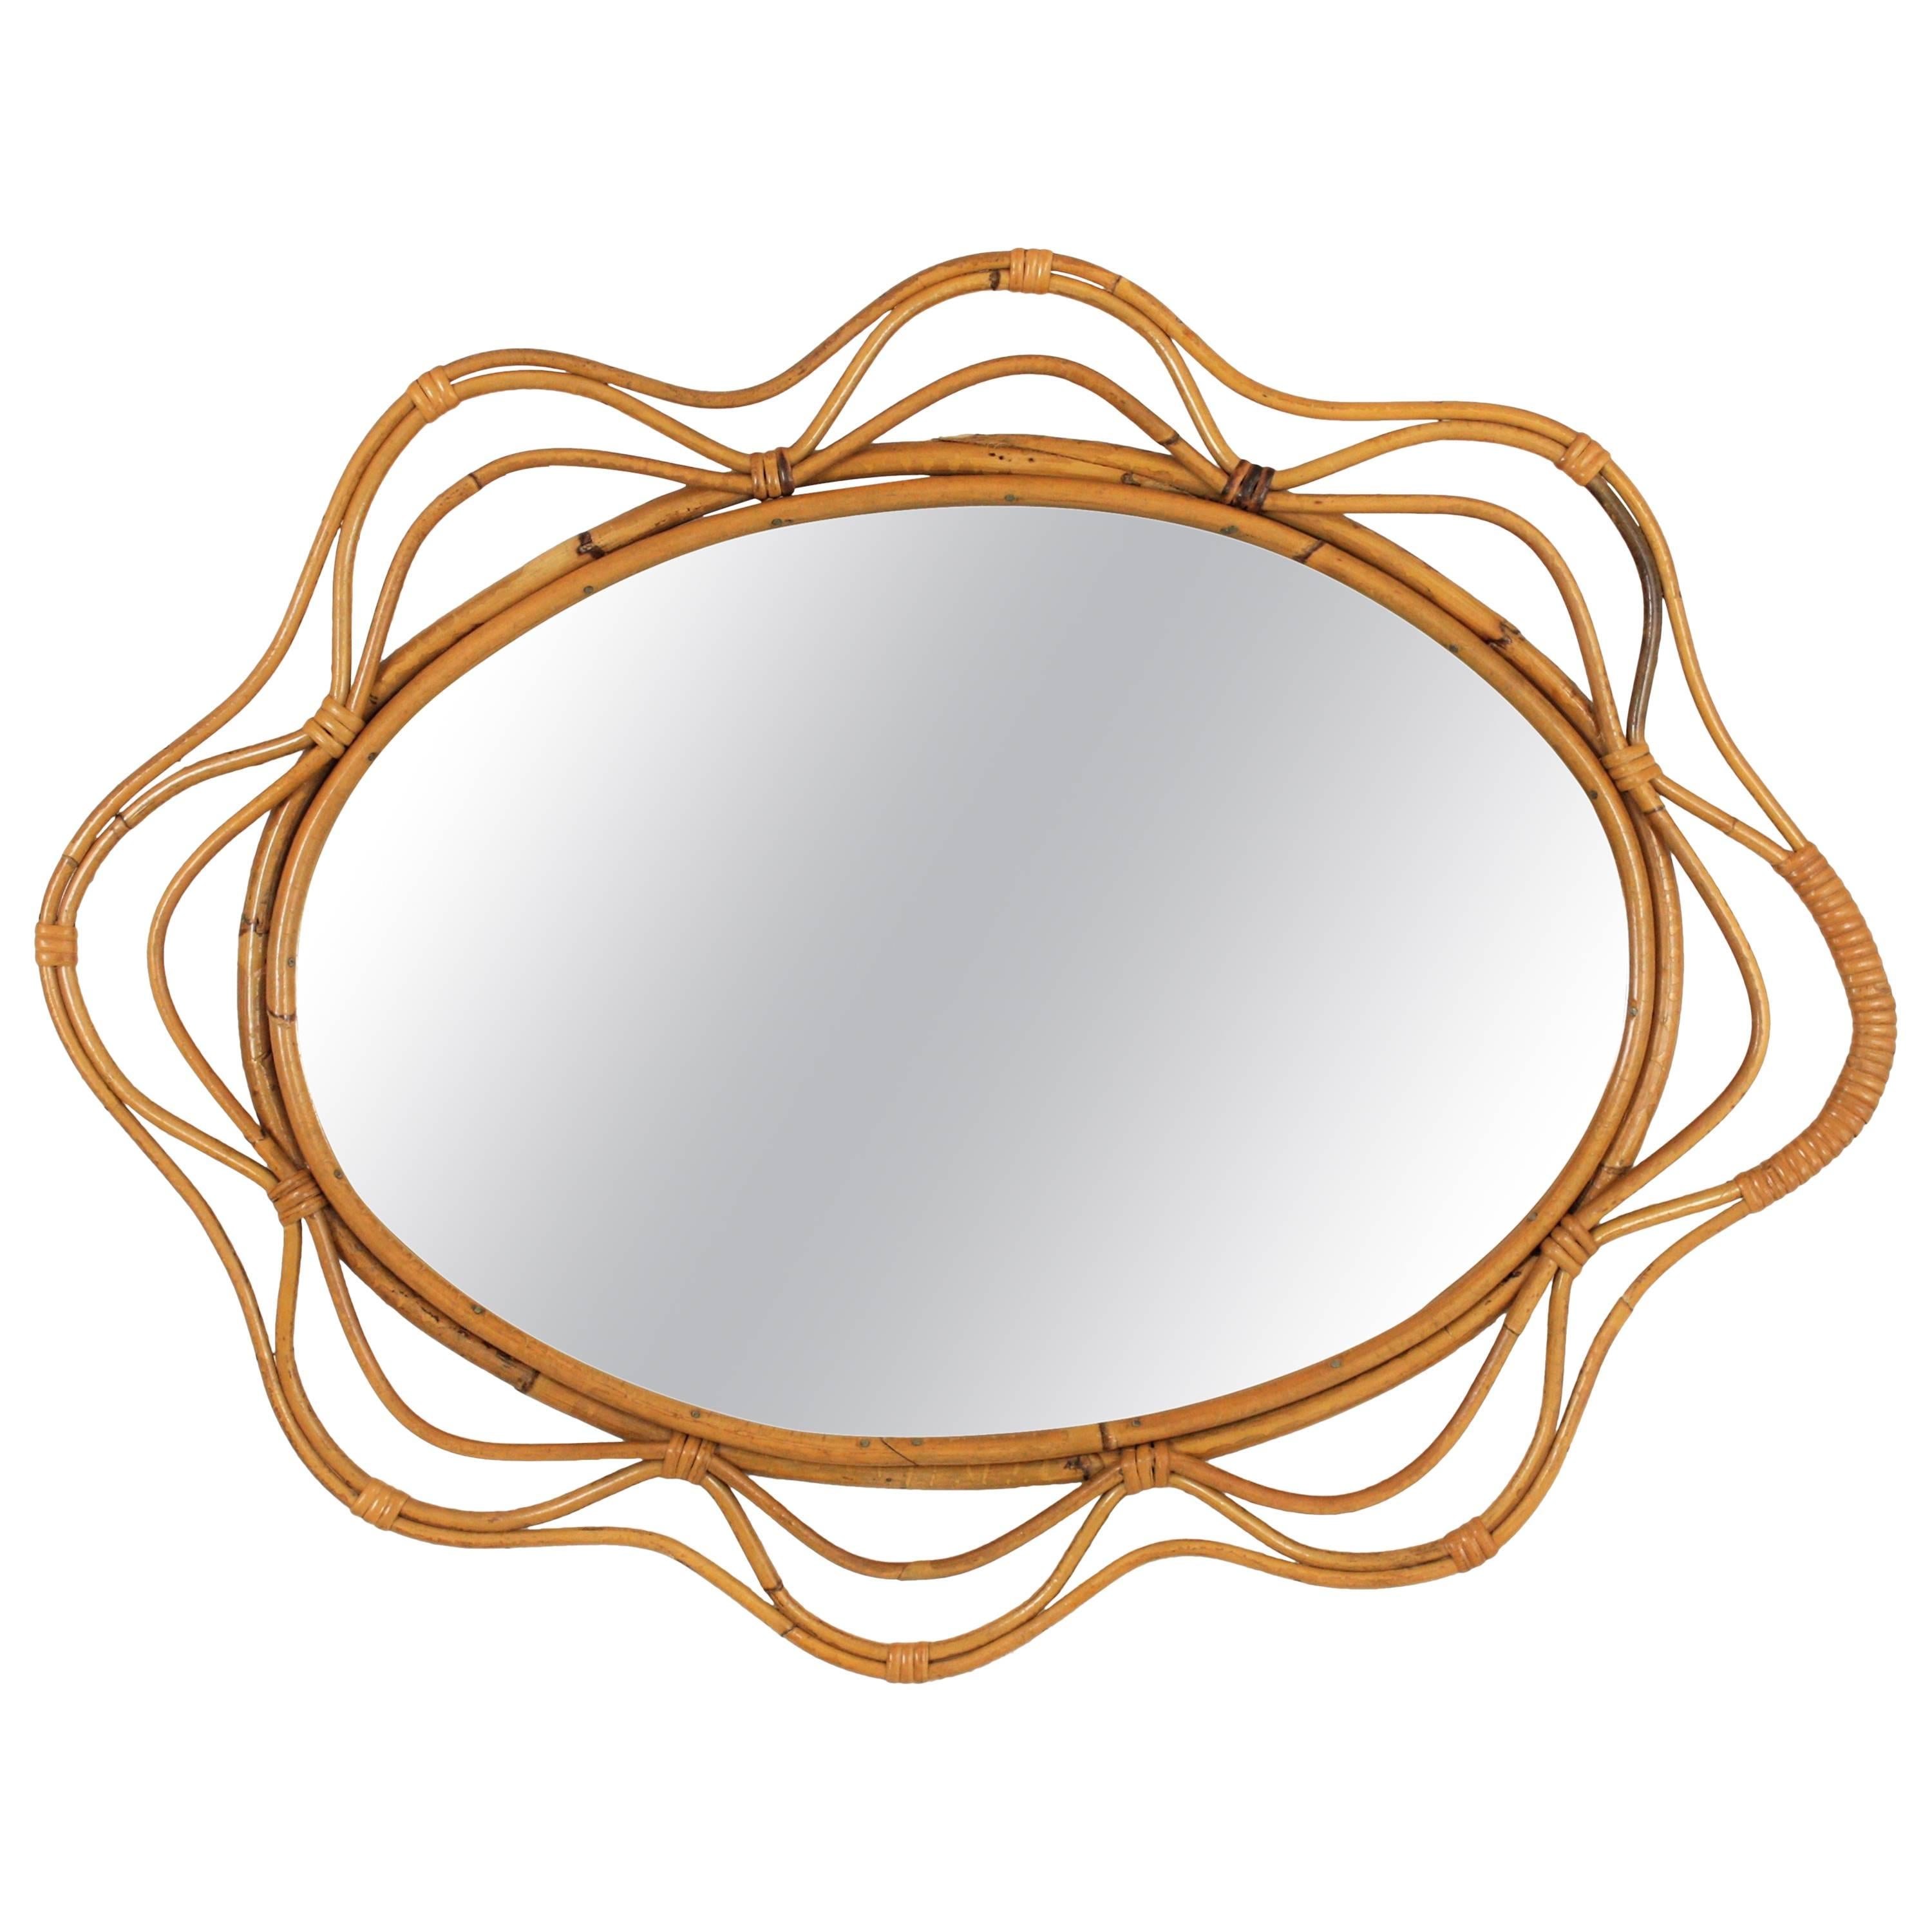 Unusual Spanish 1950s Hand-crafted Rattan and Bamboo Wavy Decorative Mirror